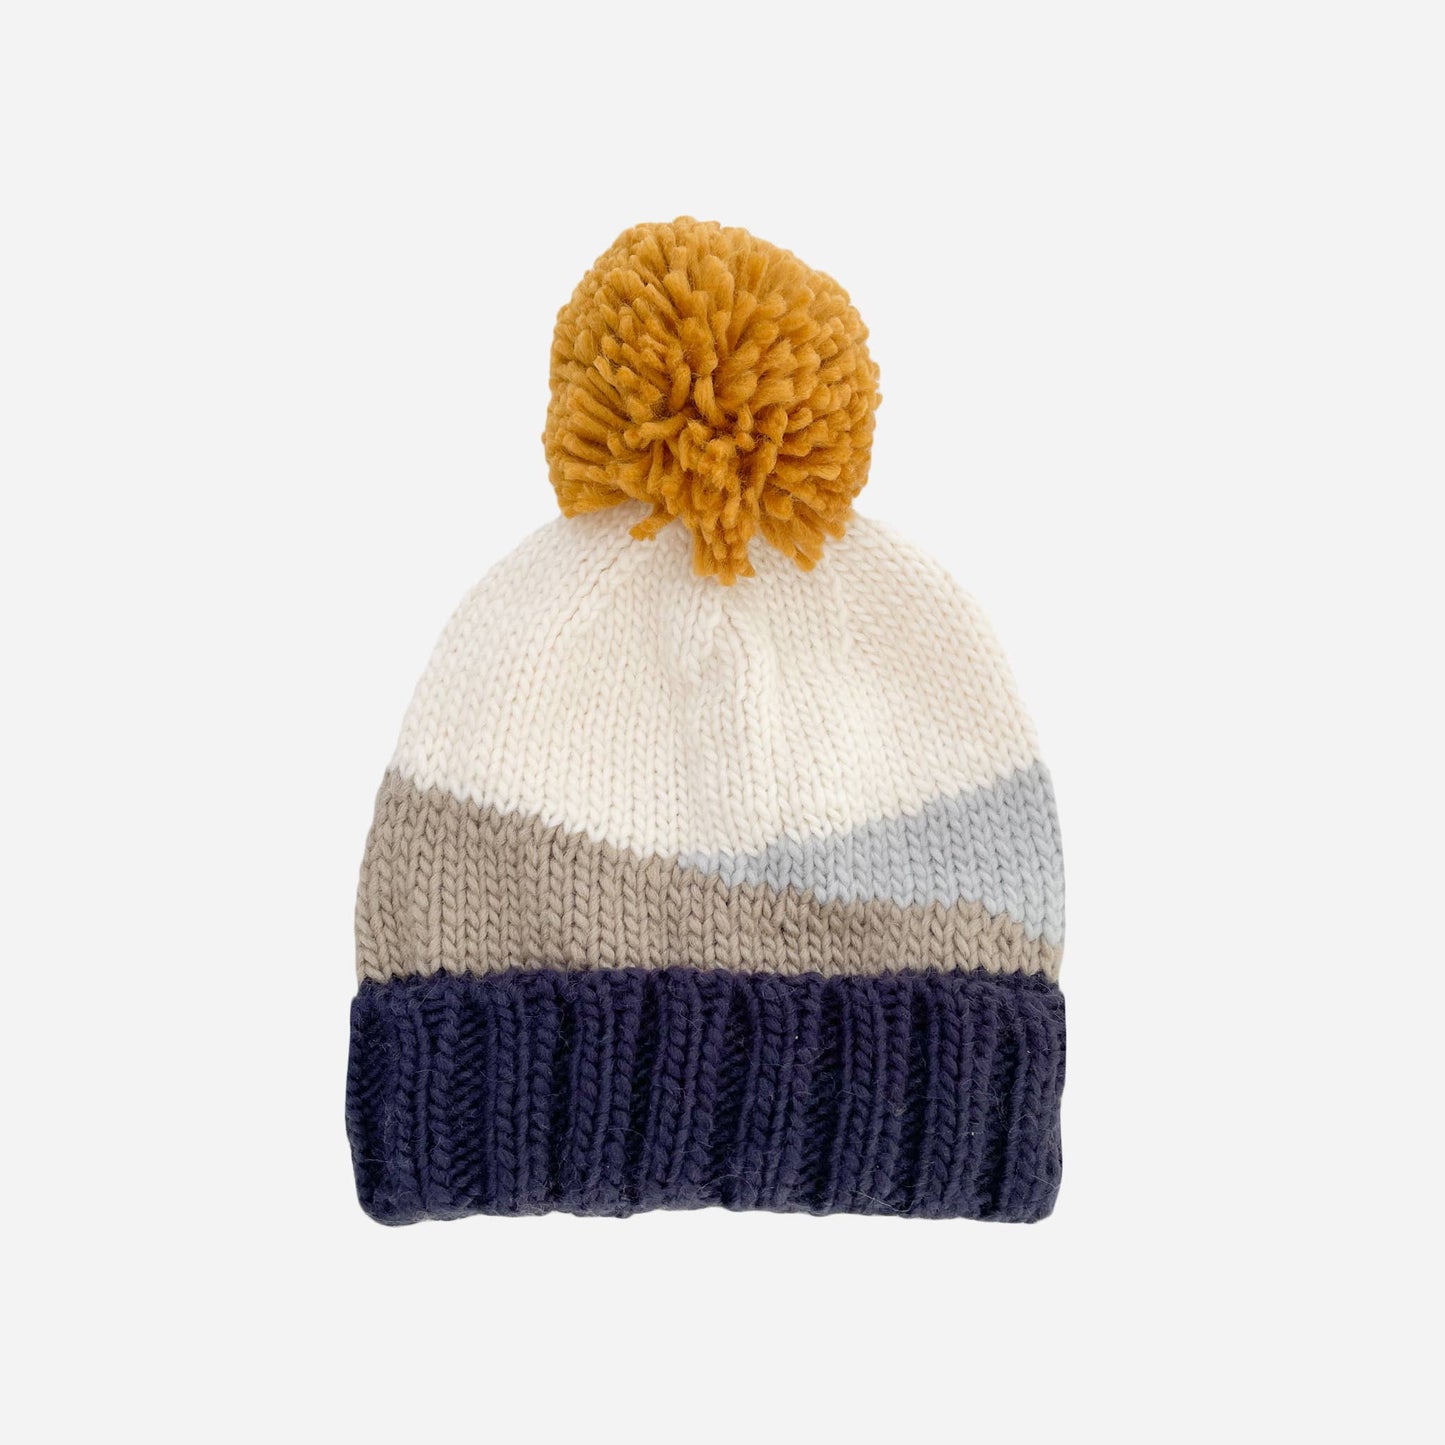 Sunset Hat, Navy | Kids and Baby Hat